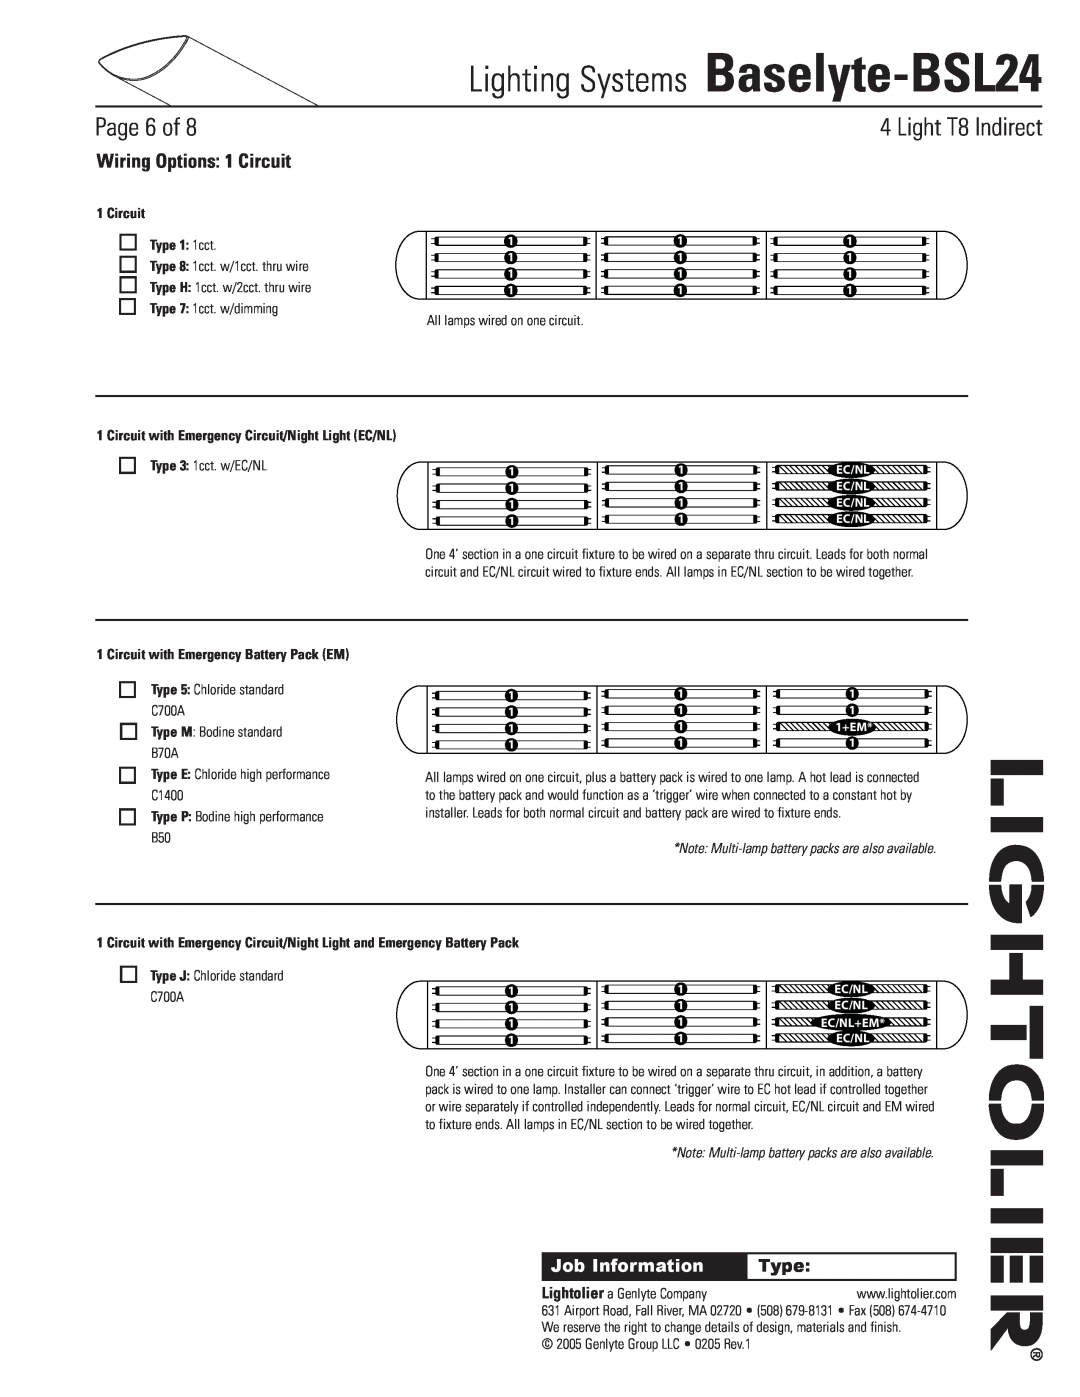 Lightolier Baselyte-BSL24 Wiring Options 1 Circuit, Circuit Type 1 1cct, Circuit with Emergency Battery Pack EM, Page of 